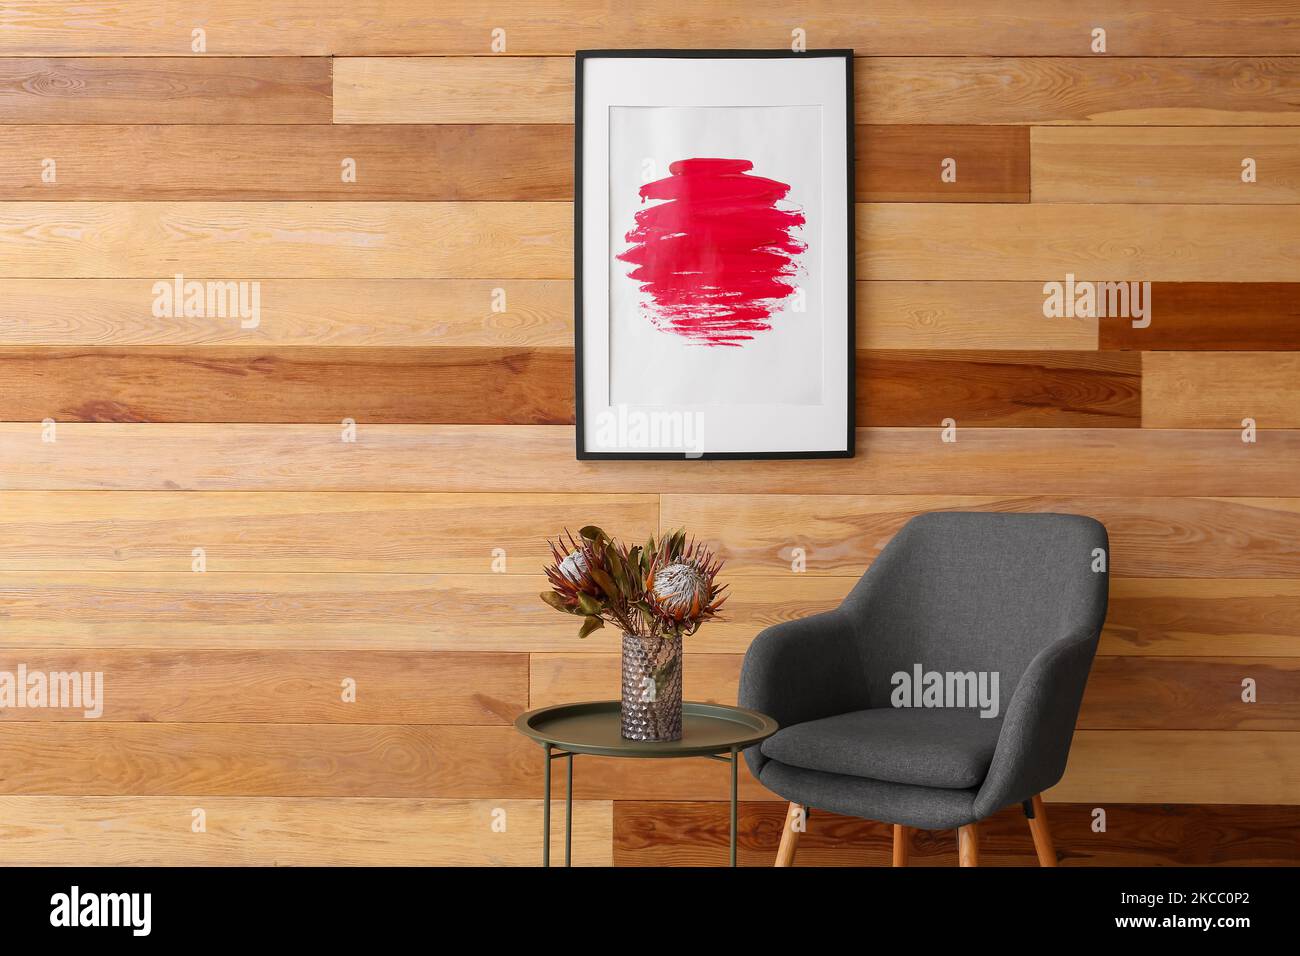 Creative picture of Japanese flag on wooden wall in interior of room Stock Photo